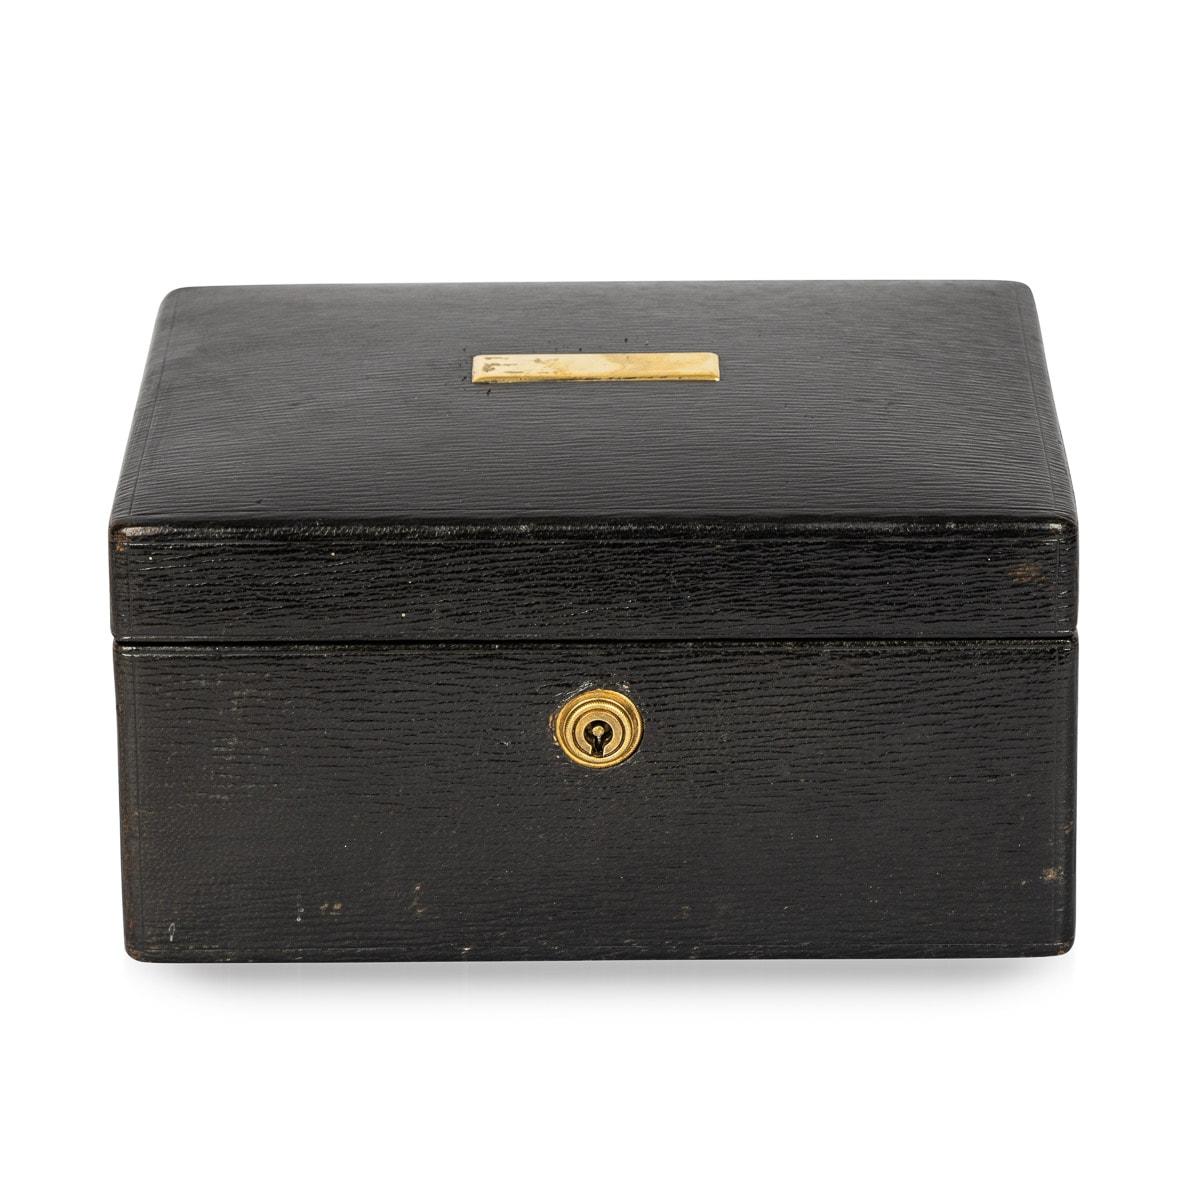 Antique early 20th Century leather bound jewellery box. This charming box features a brass plaque and a round escutcheon plate. The interior includes two removable velvet lined trays which have partitions to store an assortment of jewellery. The box